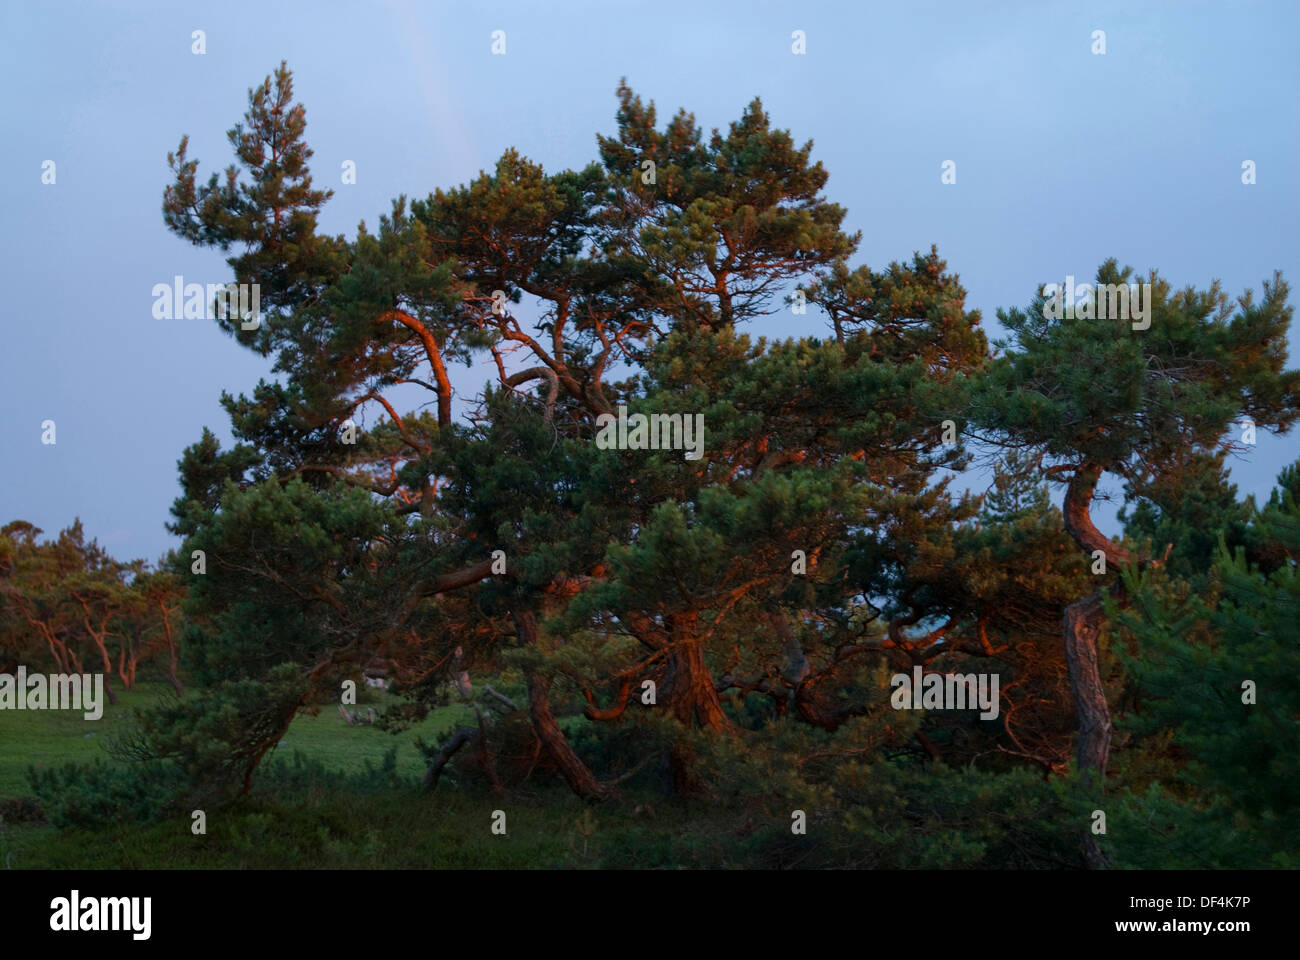 Cluster of Small Pine Trees at Sunset Stock Photo